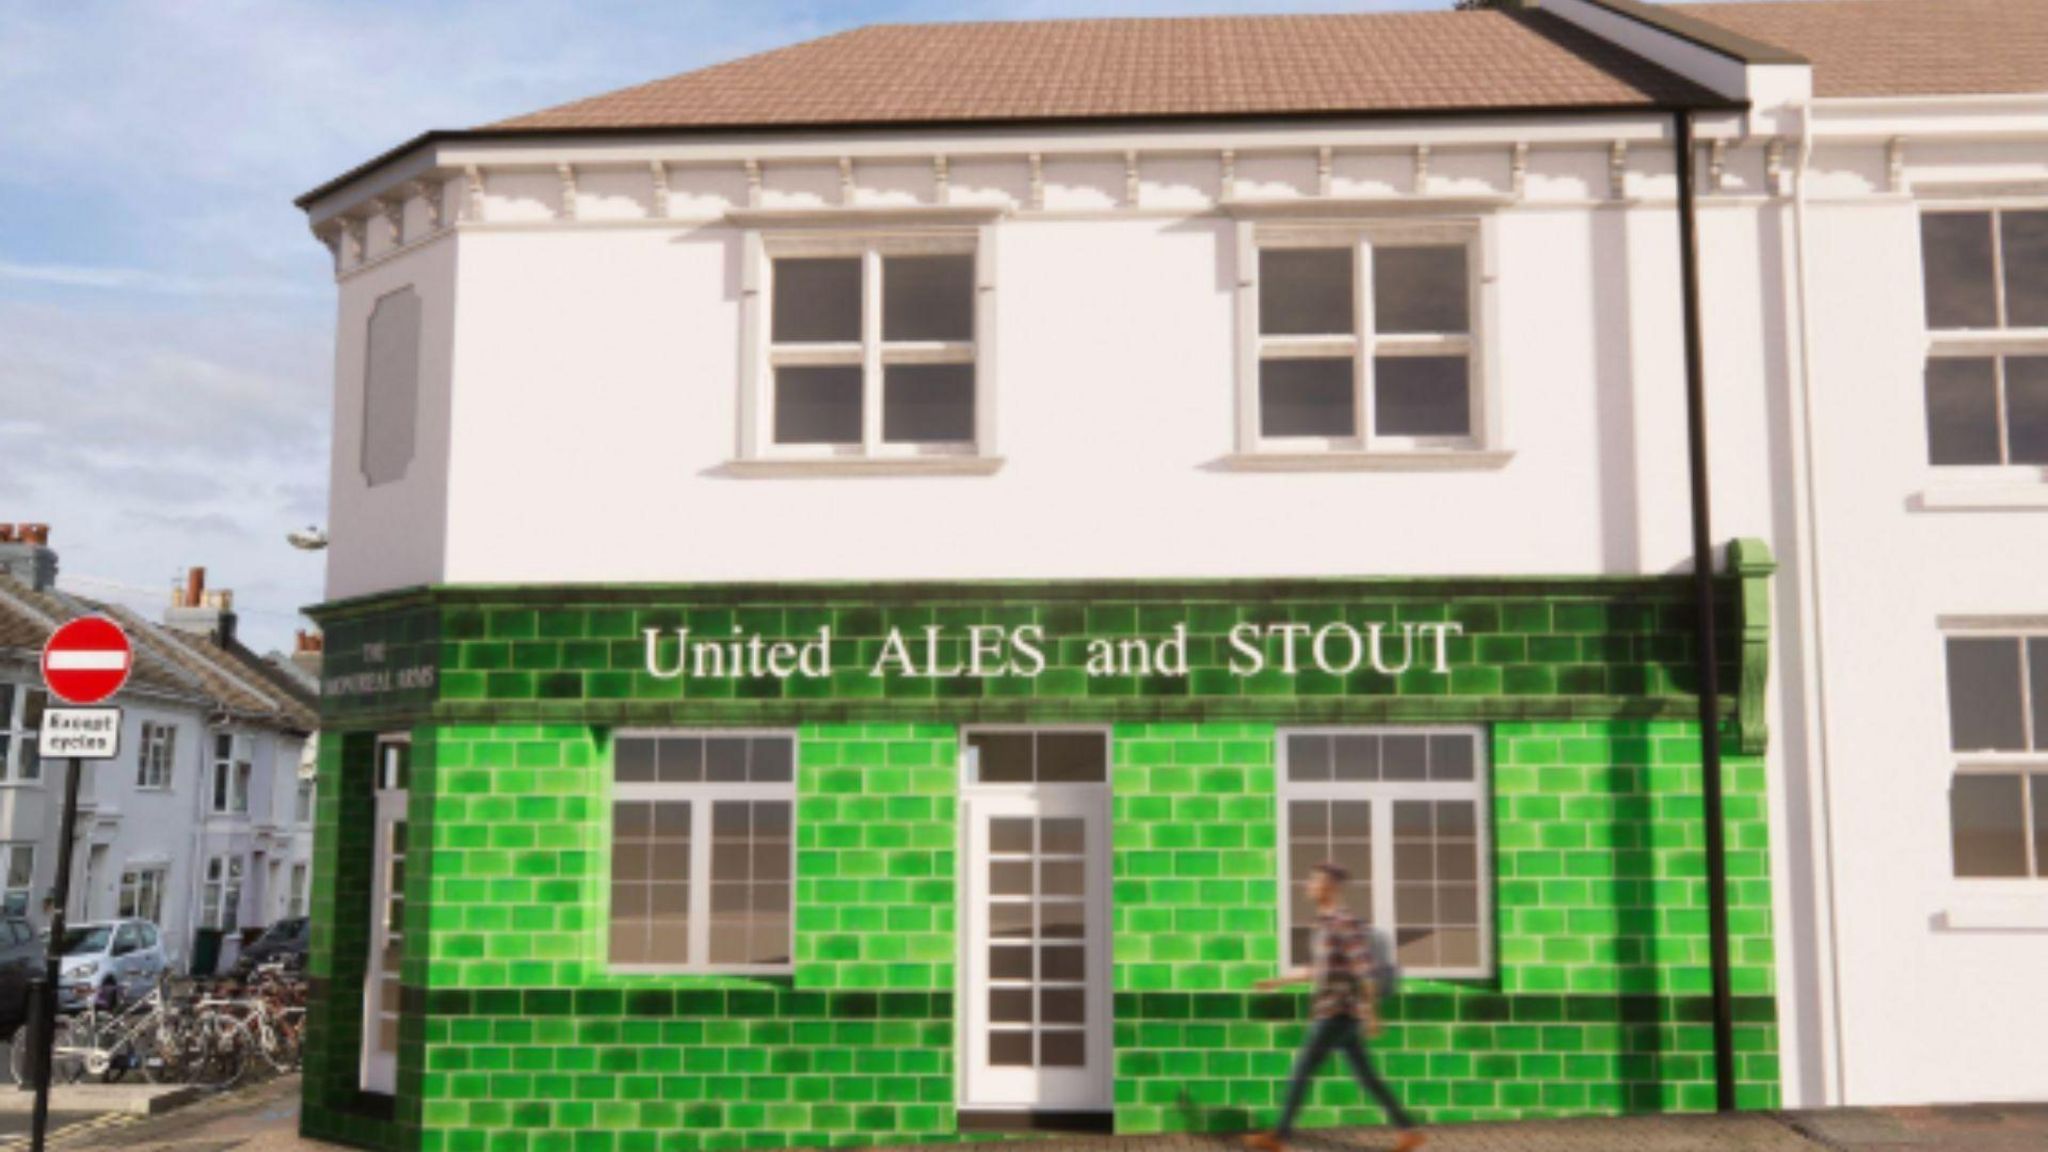 CGI shows lower half of pub restored with green tiles